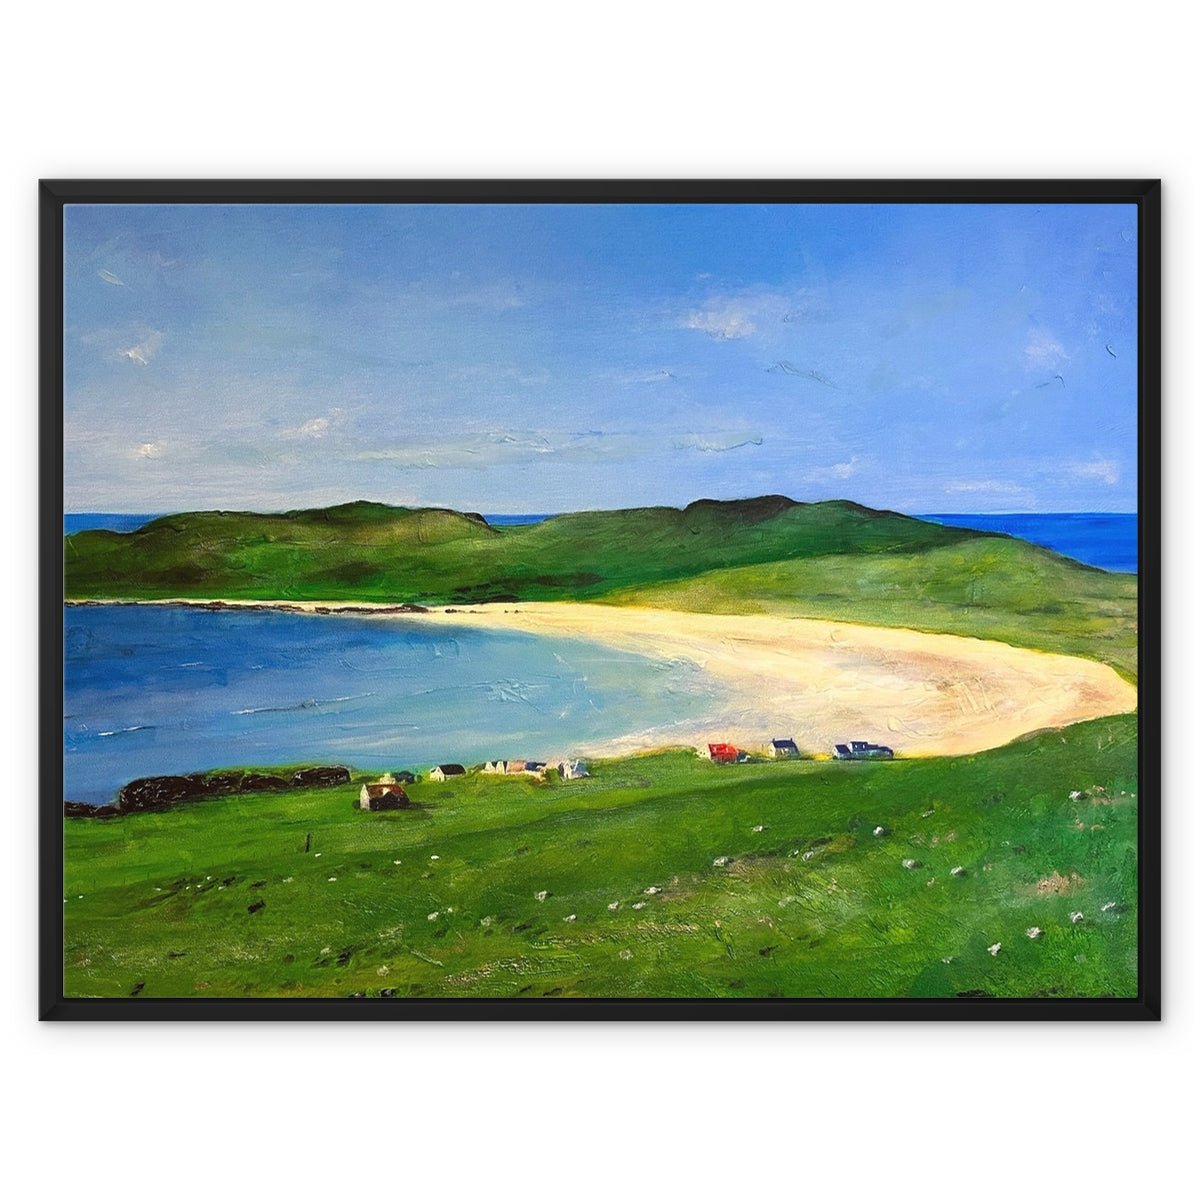 Balephuil Beach Tiree Painting | Framed Canvas From Scotland-Floating Framed Canvas Prints-Hebridean Islands Art Gallery-32"x24"-Black Frame-Paintings, Prints, Homeware, Art Gifts From Scotland By Scottish Artist Kevin Hunter